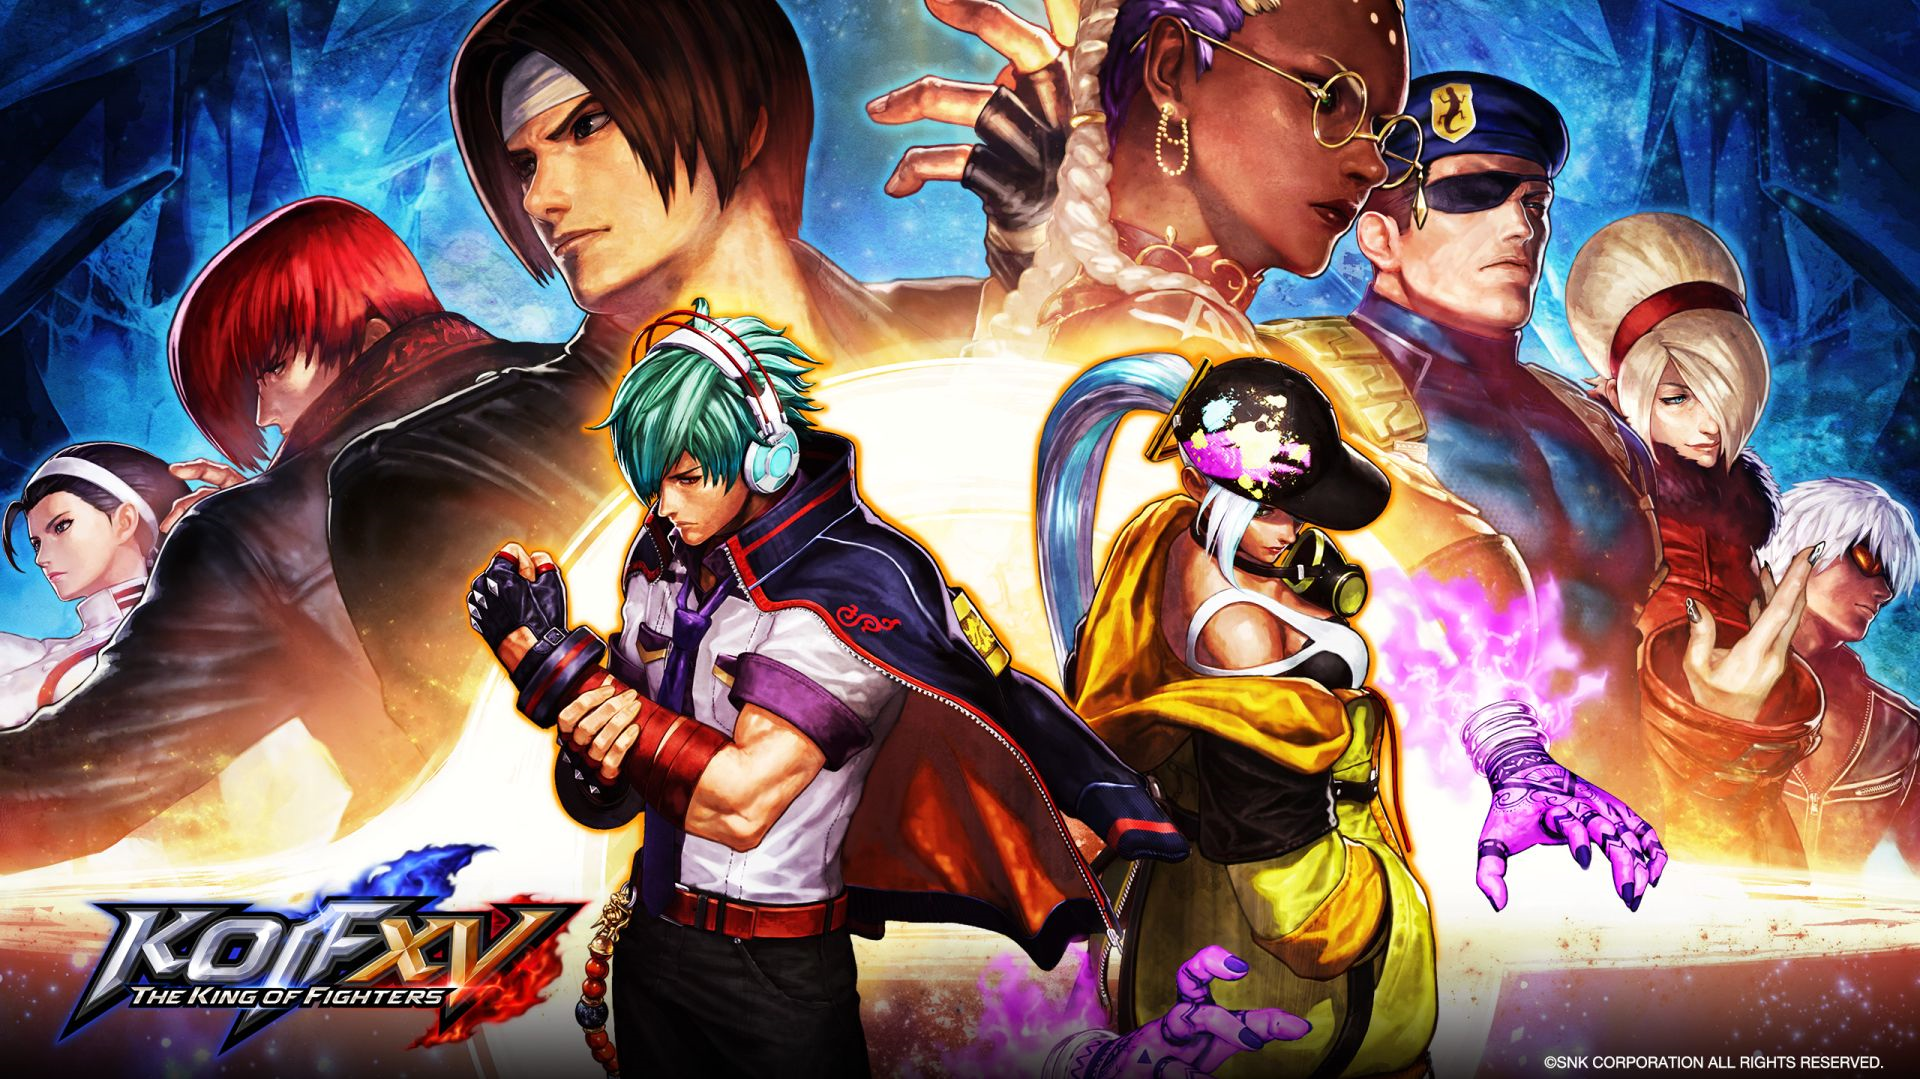 The King of Fighters 15 เพิ่ม Dolores และประกาศเปิด Open Beta บน PS5, PS4